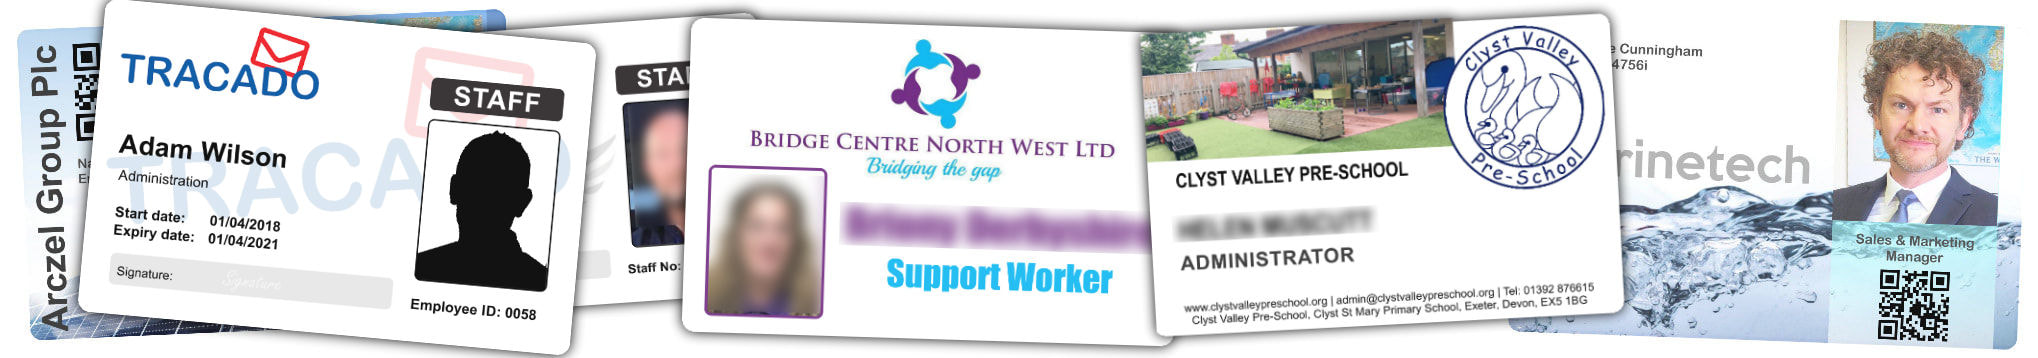 Woking examples of staff photo ID cards | samples of employee Identity card printing | Workers ID cards printed in 